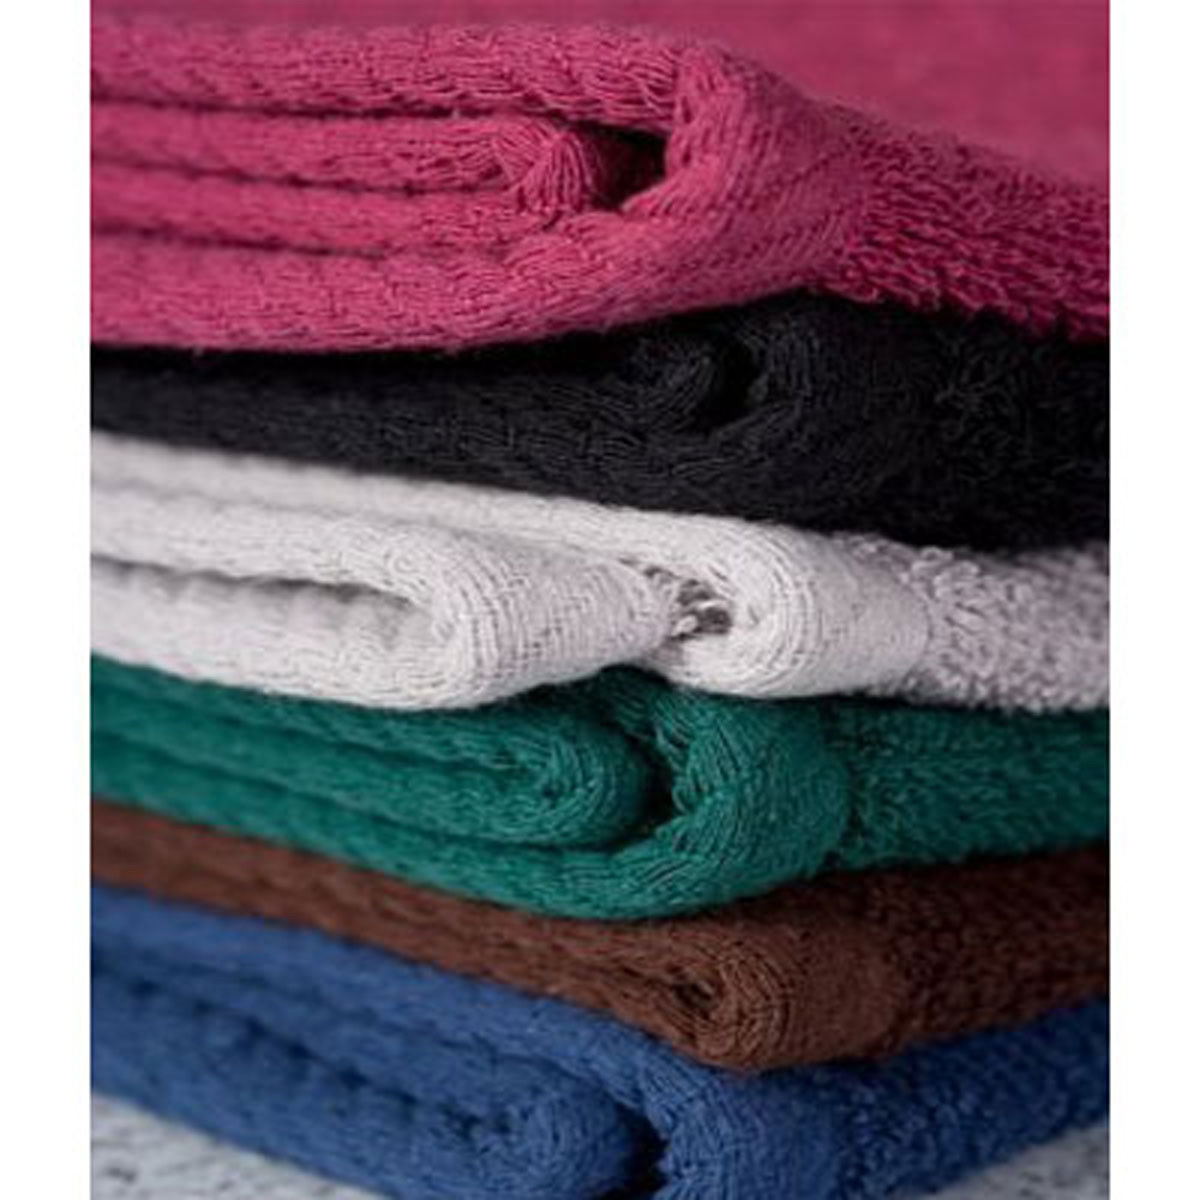 What are the ideal uses for 16x28 changing pad bleach proof Spa & Salon Hand Towels?